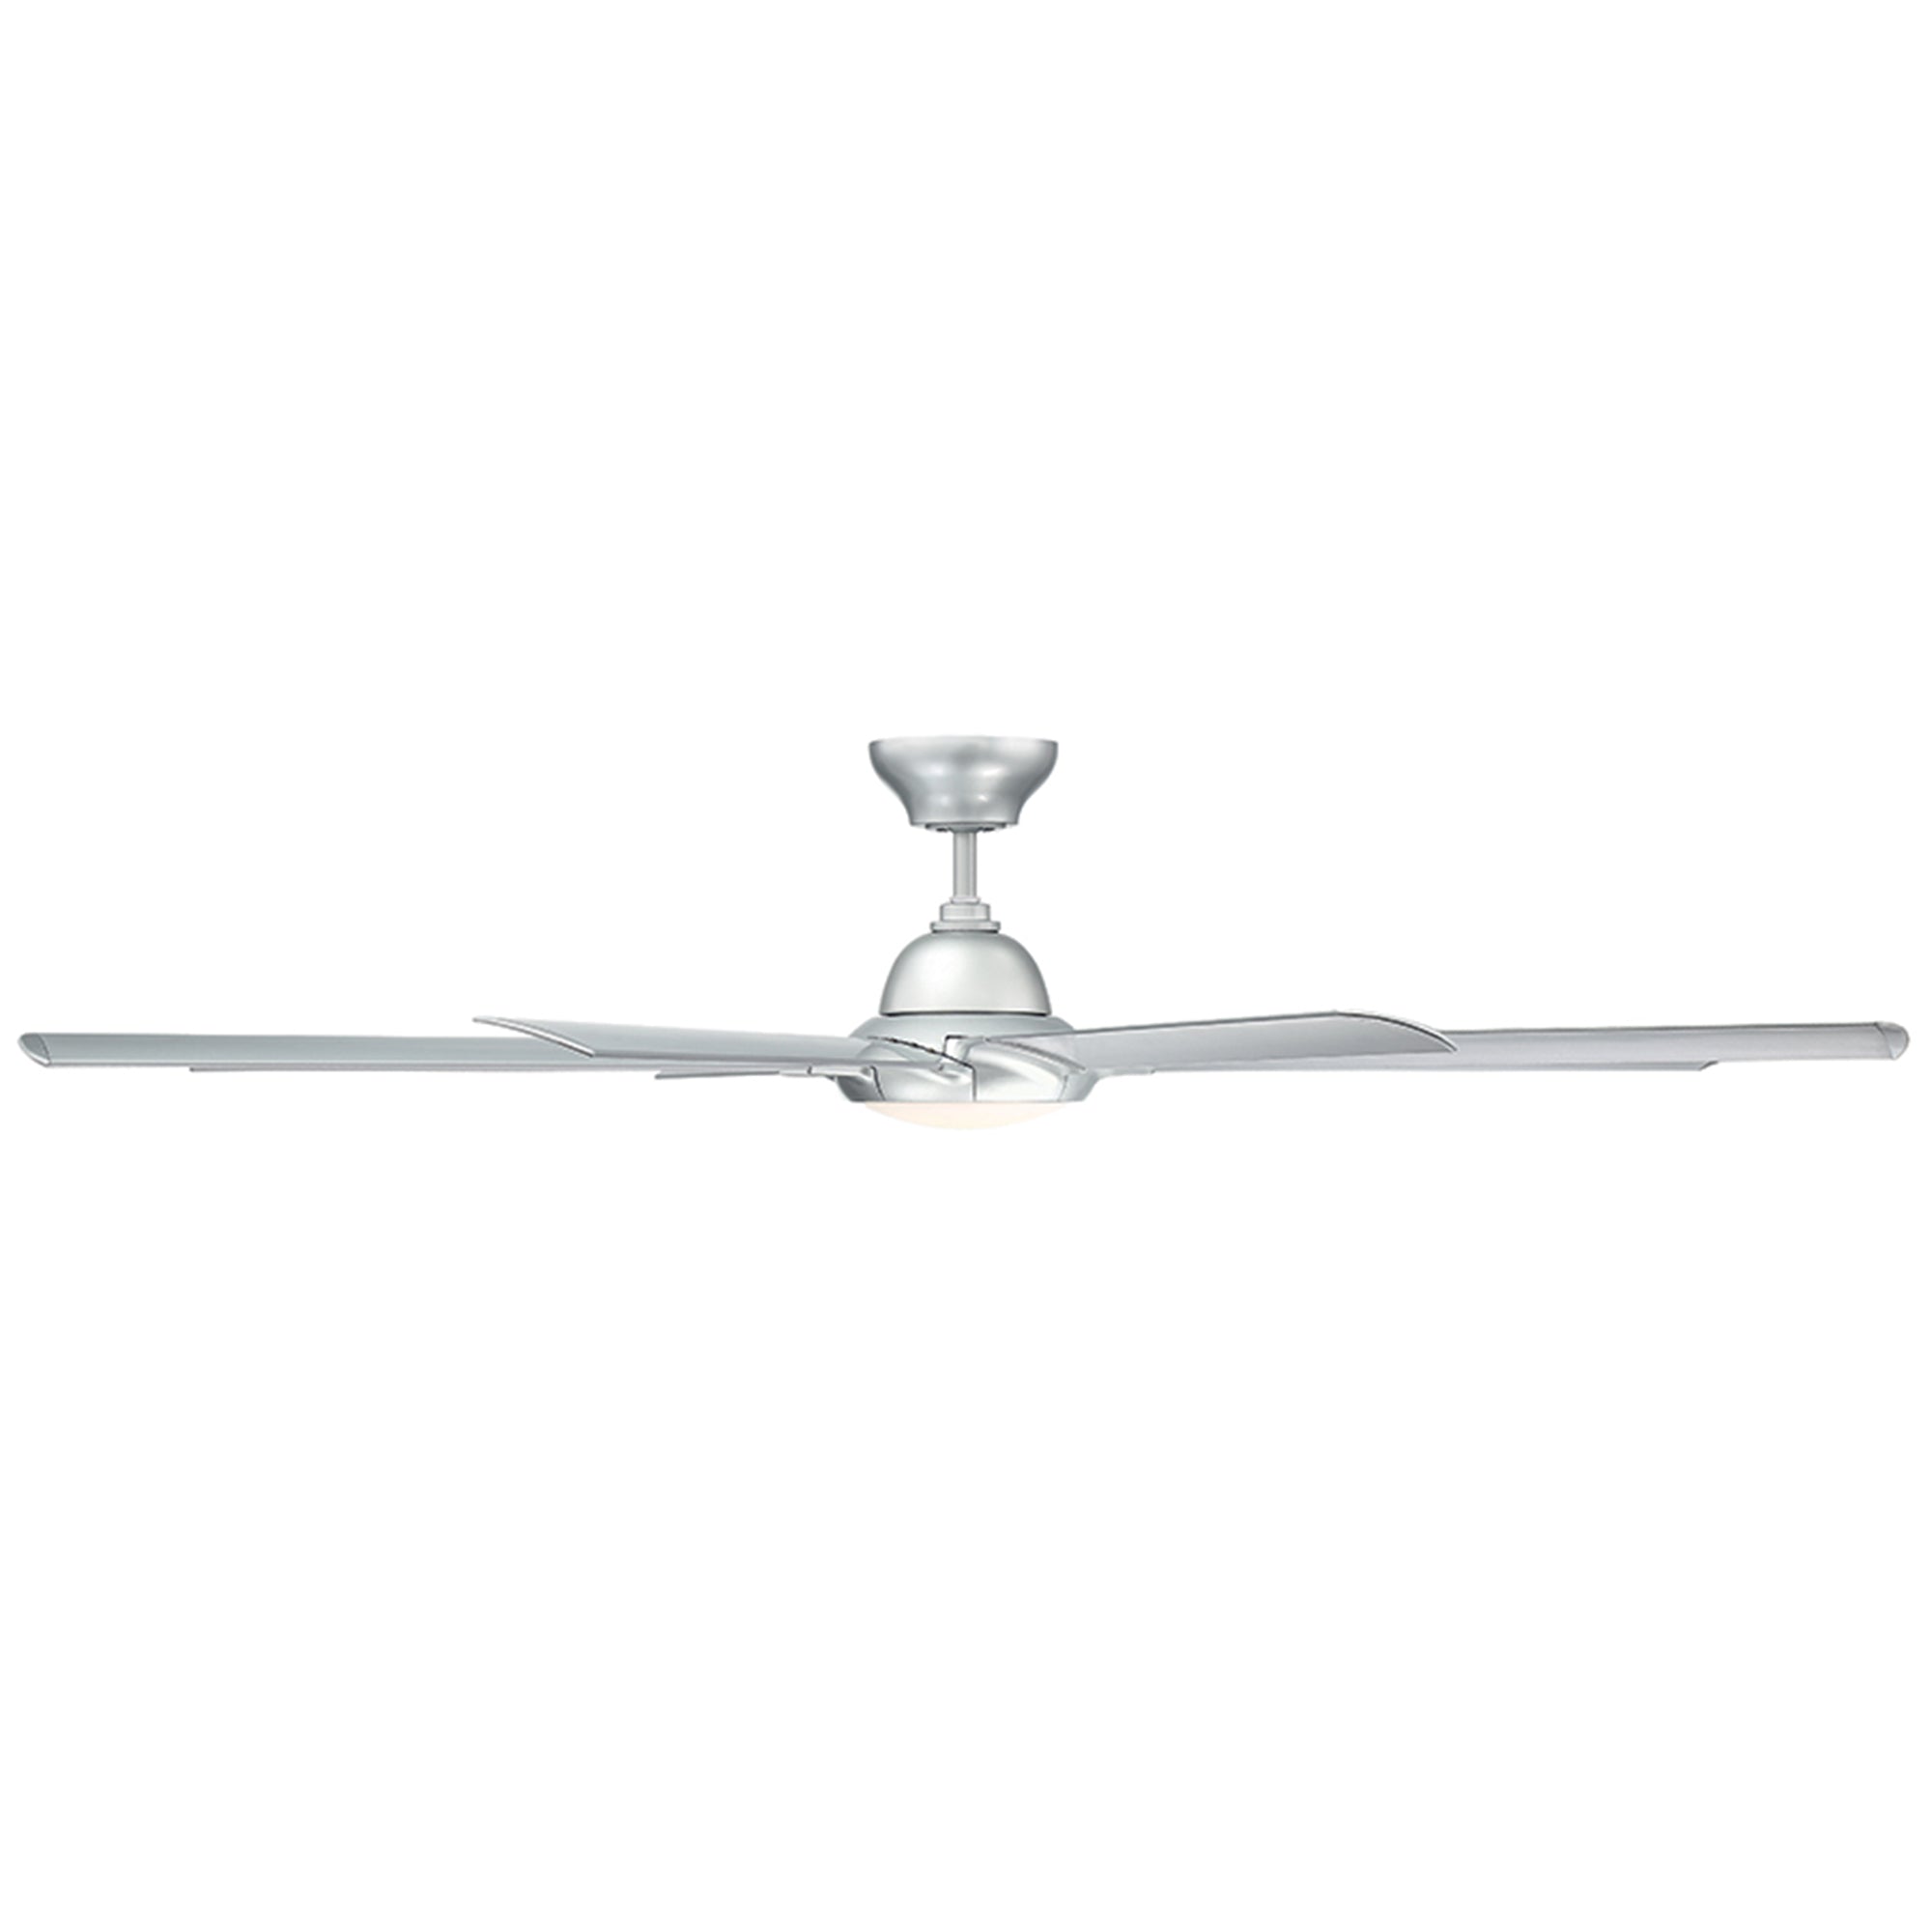 Hydra Indoor/Outdoor 8-Blade 96" Smart Ceiling Fan with LED Light Kit